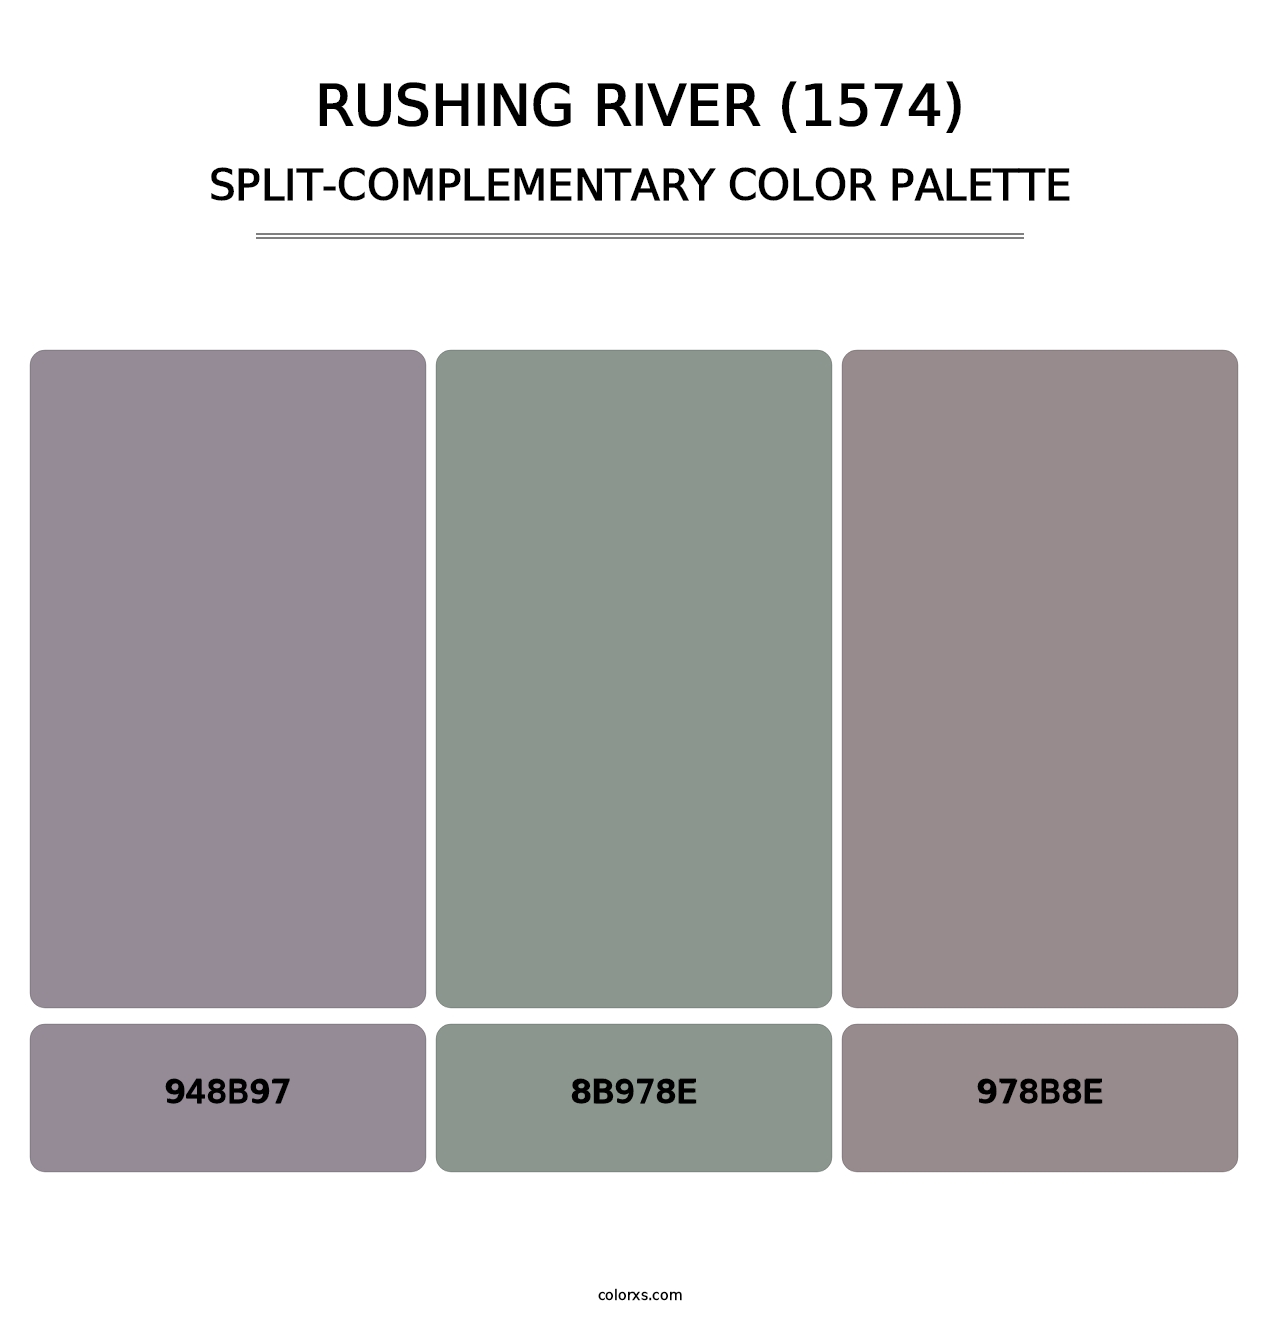 Rushing River (1574) - Split-Complementary Color Palette